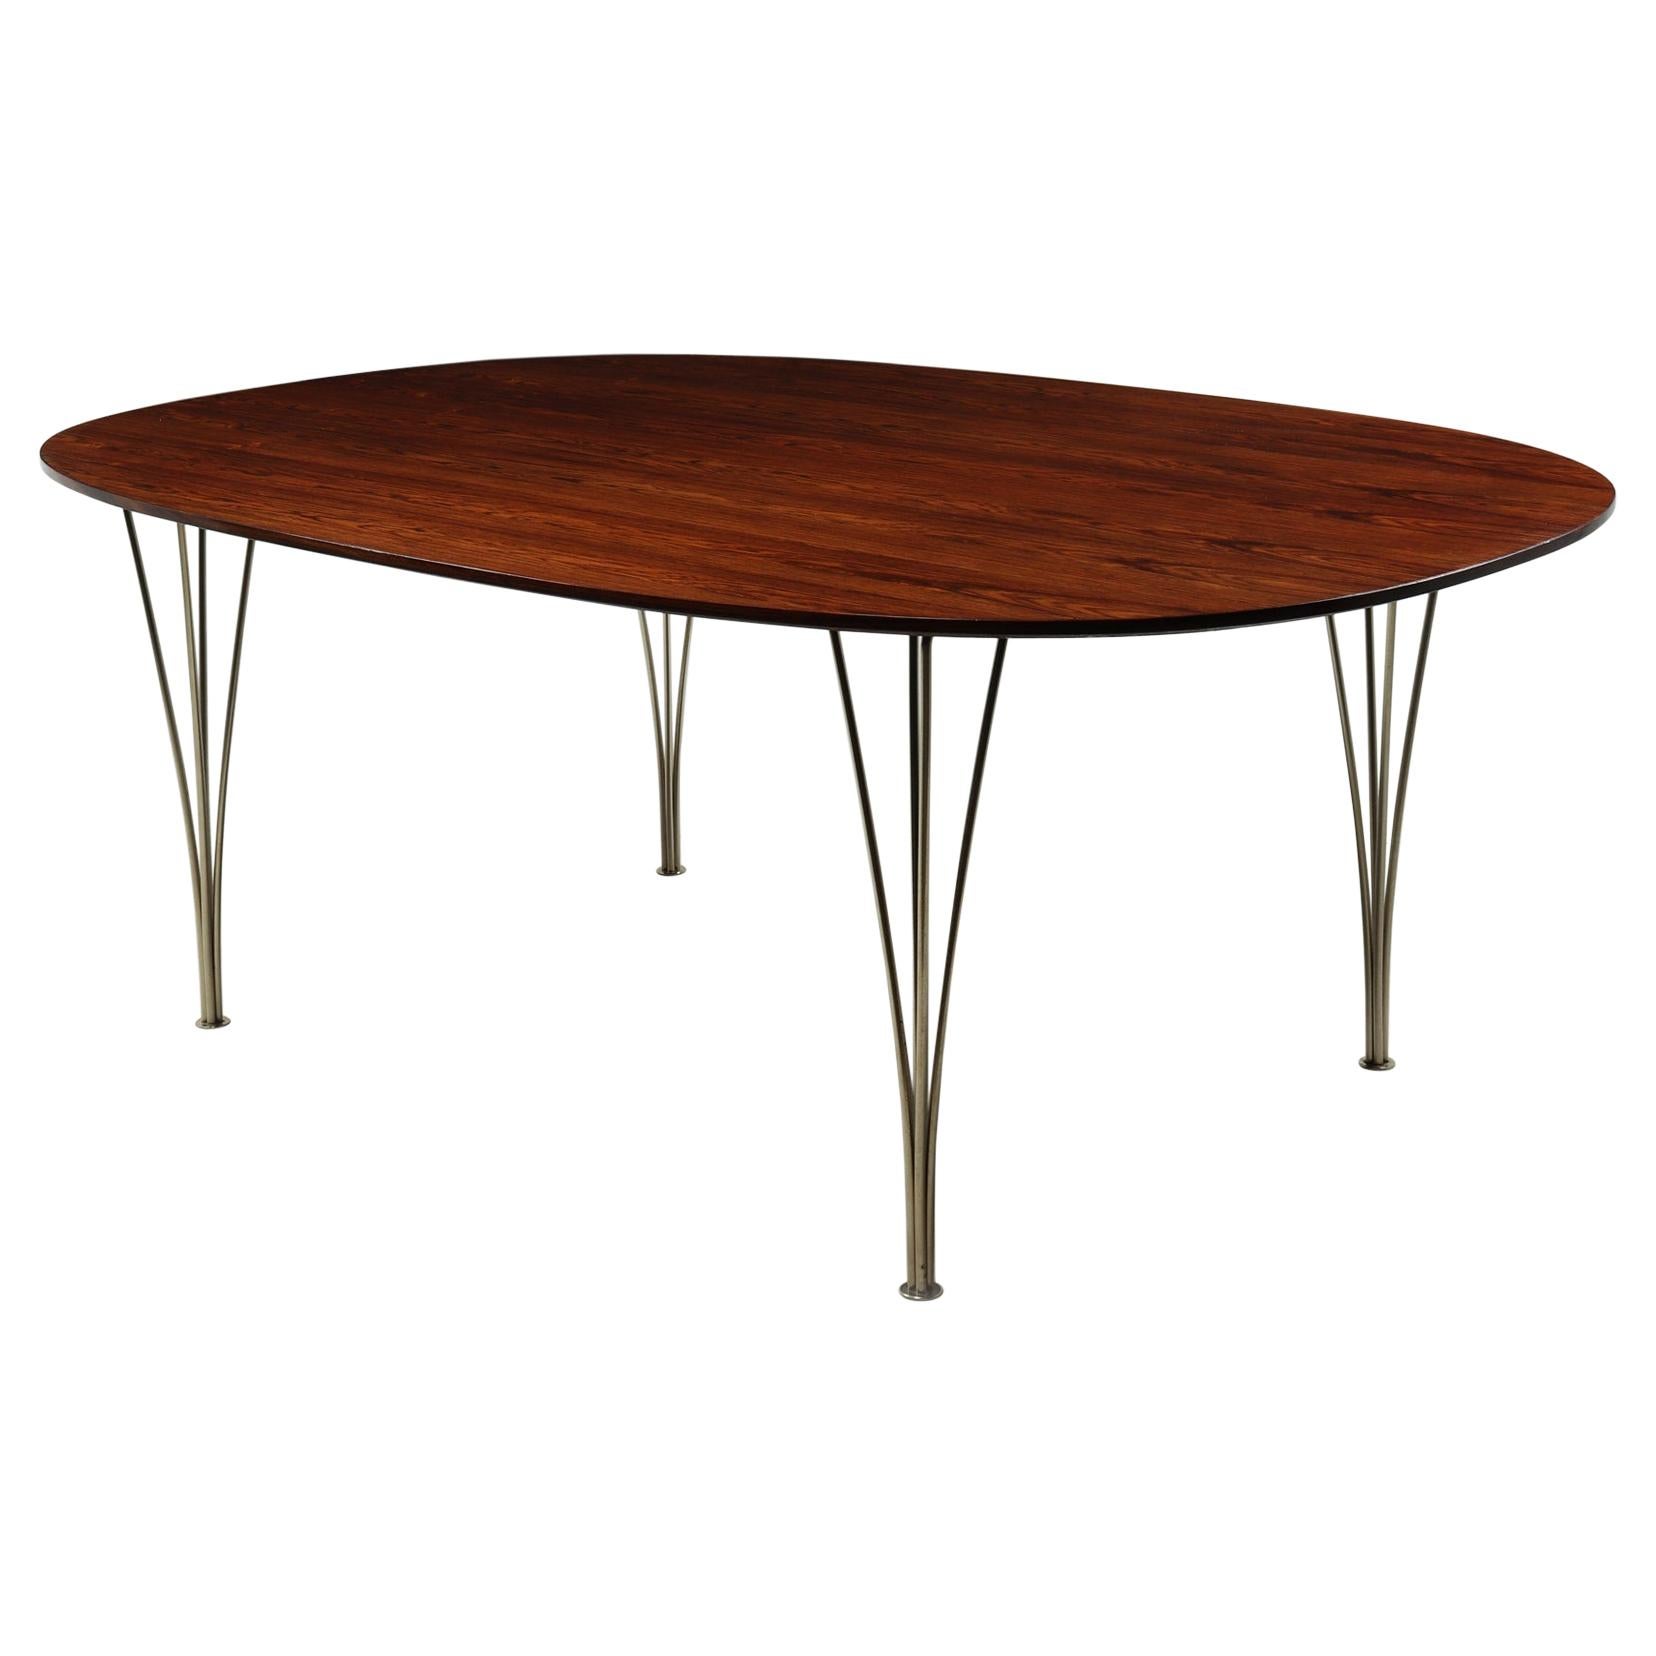 Super Elliptical Dining Table by Piet Hein and Bruno Matheson c1960